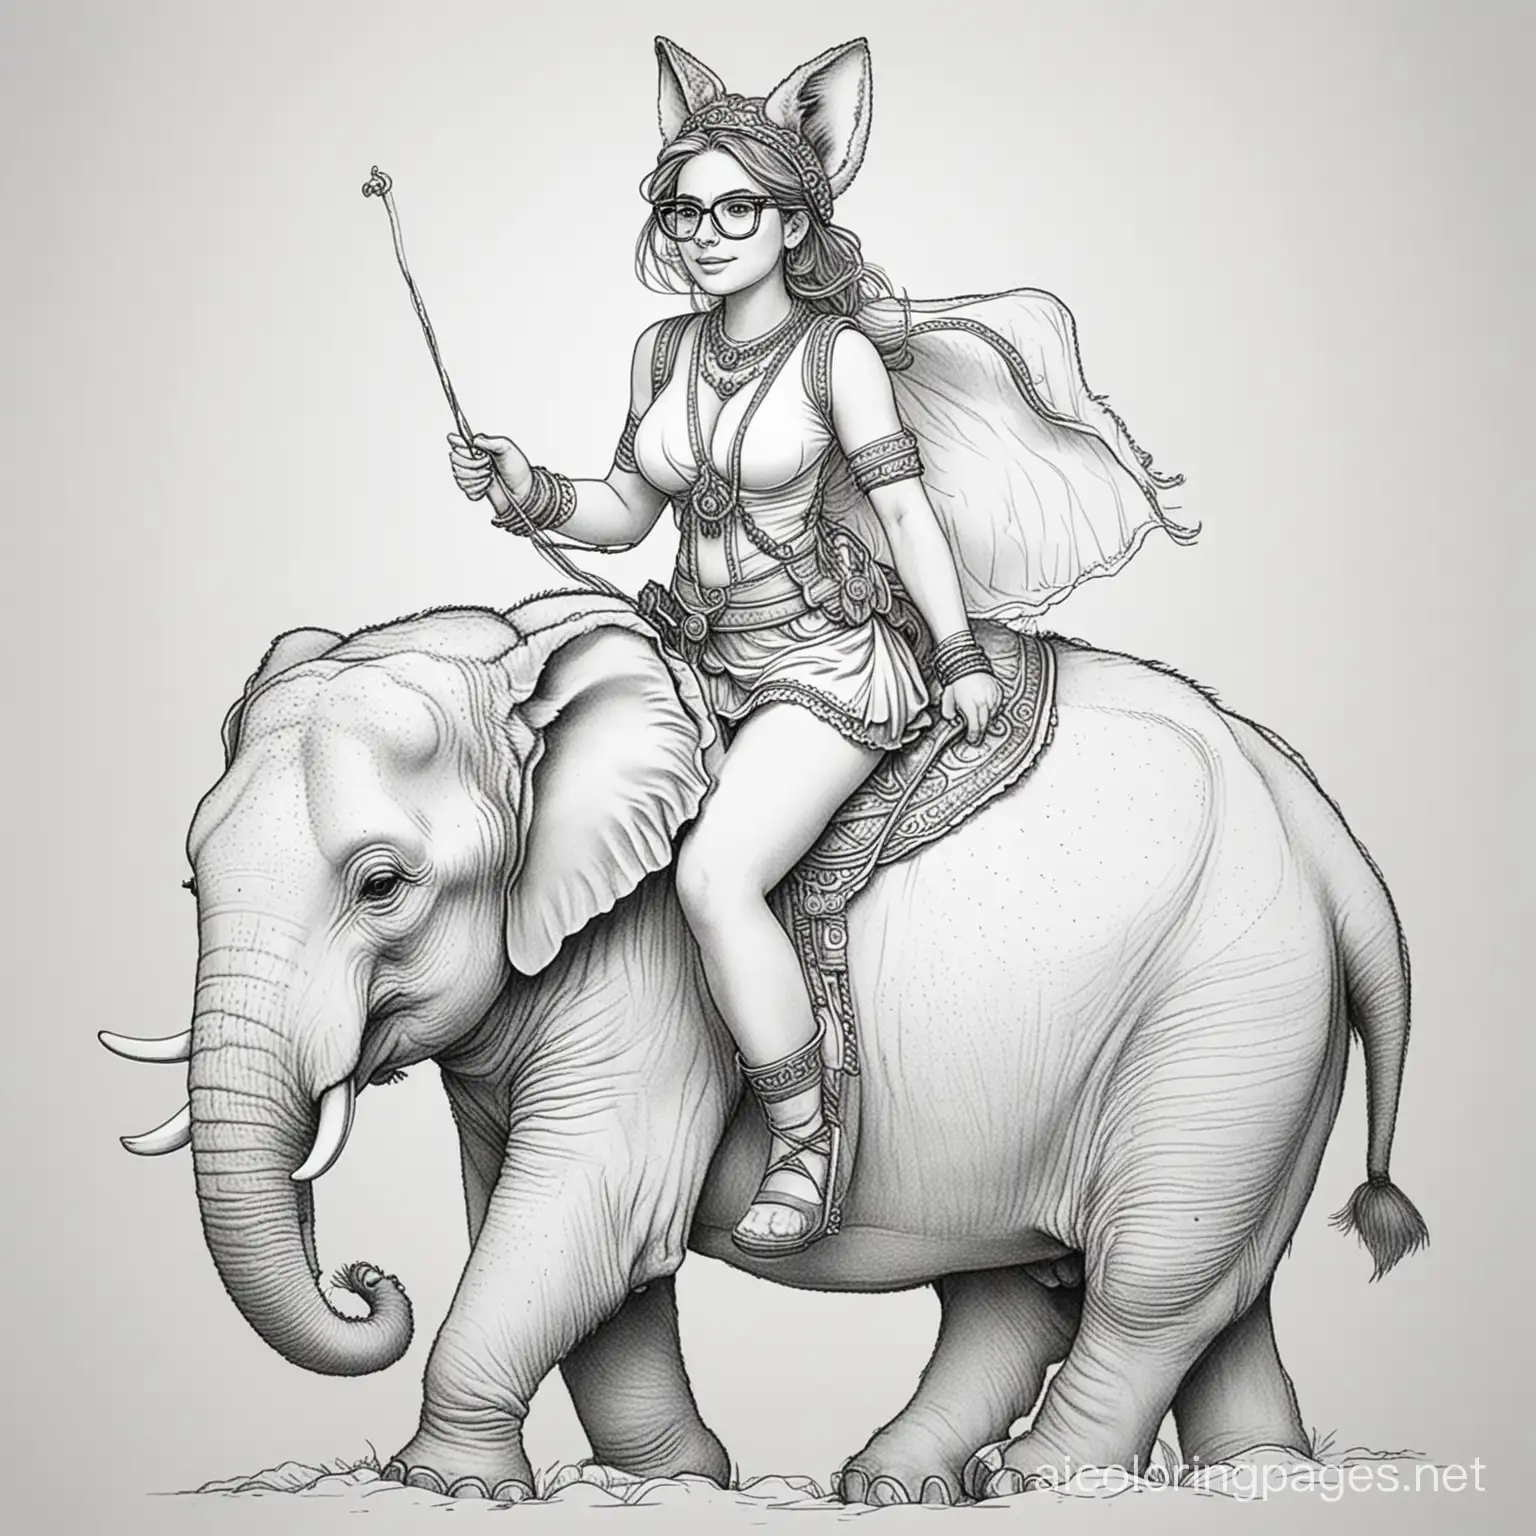 large breasted woman with fox ears and glasses riding an elephant

, Coloring Page, black and white, line art, white background, Simplicity, Ample White Space. The background of the coloring page is plain white to make it easy for young children to color within the lines. The outlines of all the subjects are easy to distinguish, making it simple for kids to color without too much difficulty